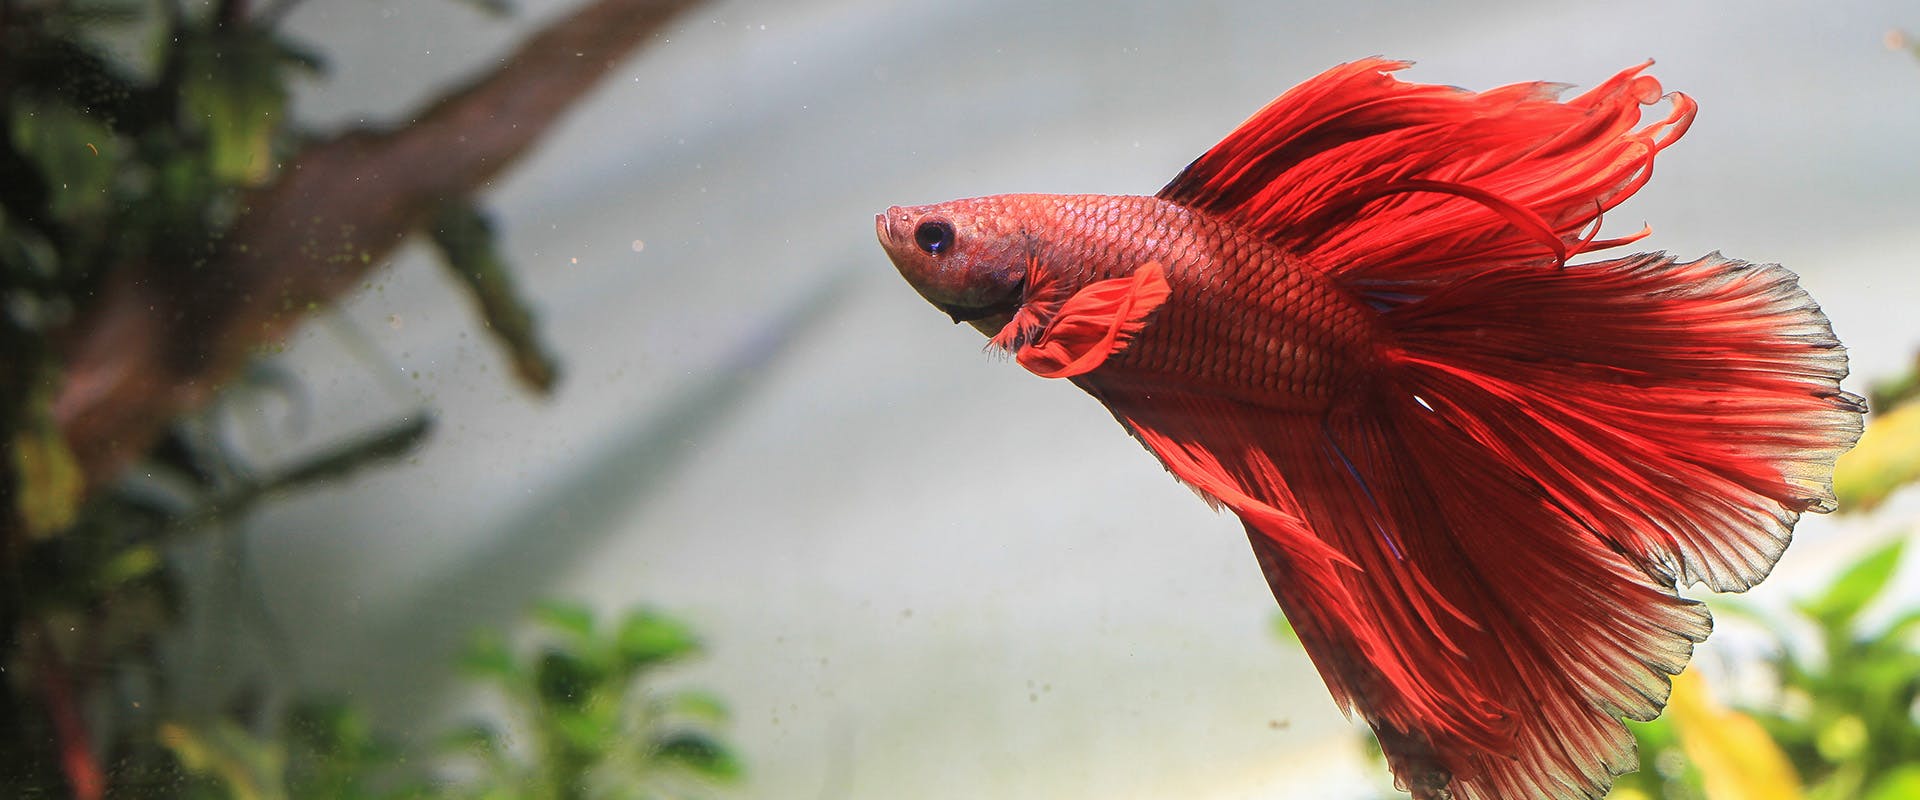 A red betta fish swimming in a tank